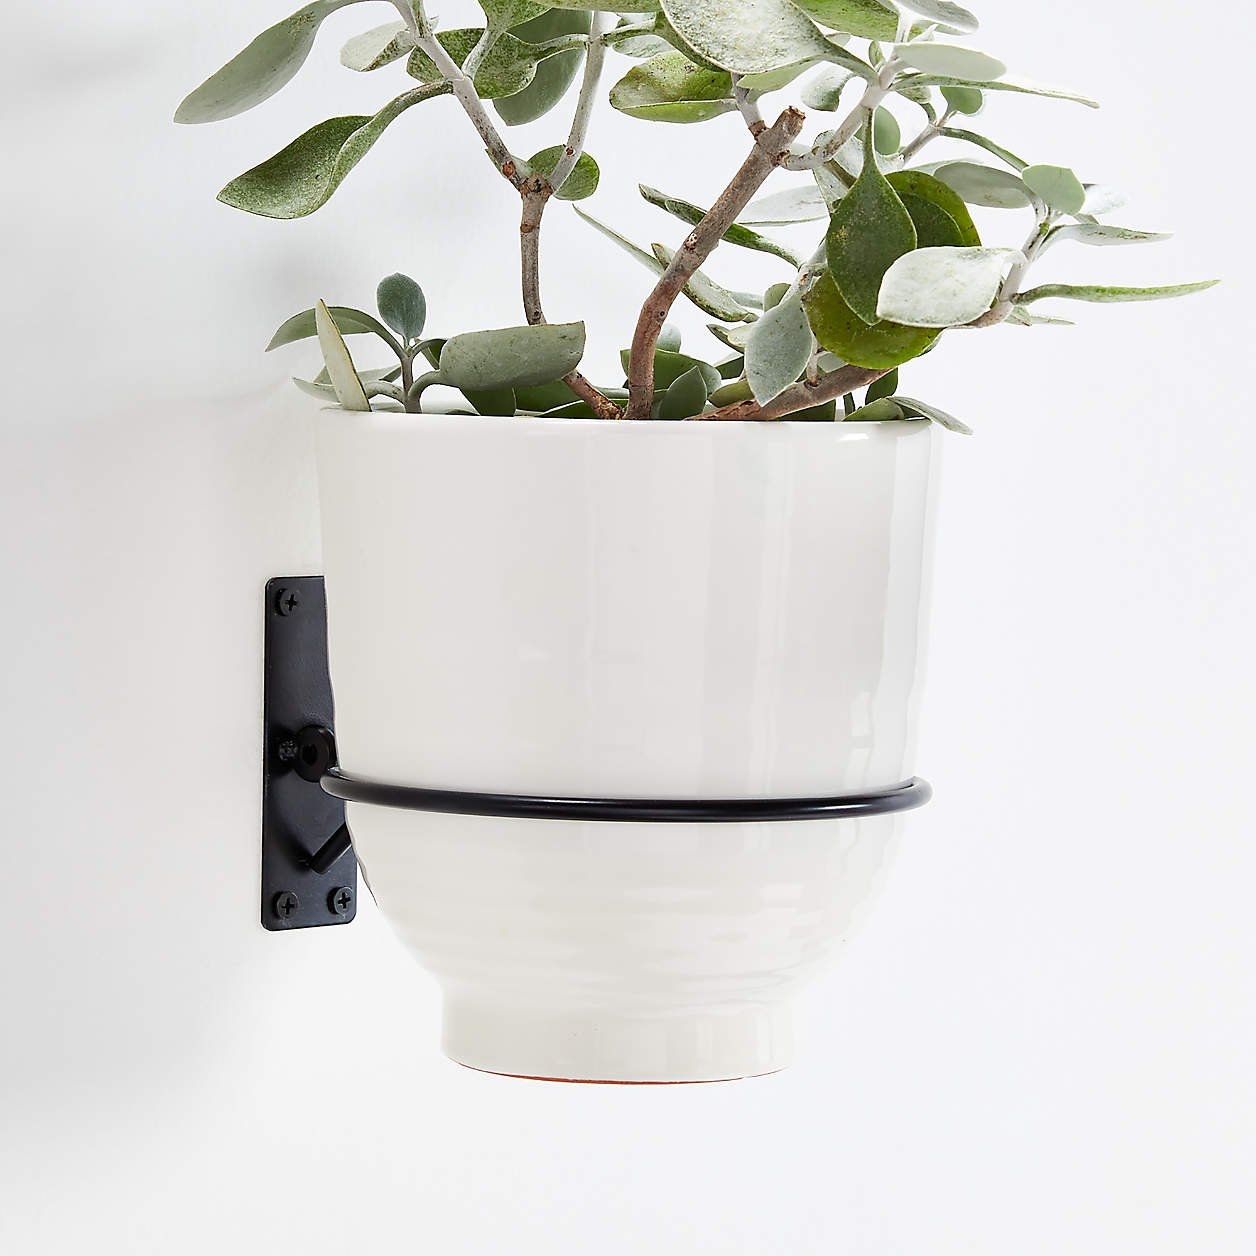 Wall Planter Hook - Crate and Barrel - Image 1